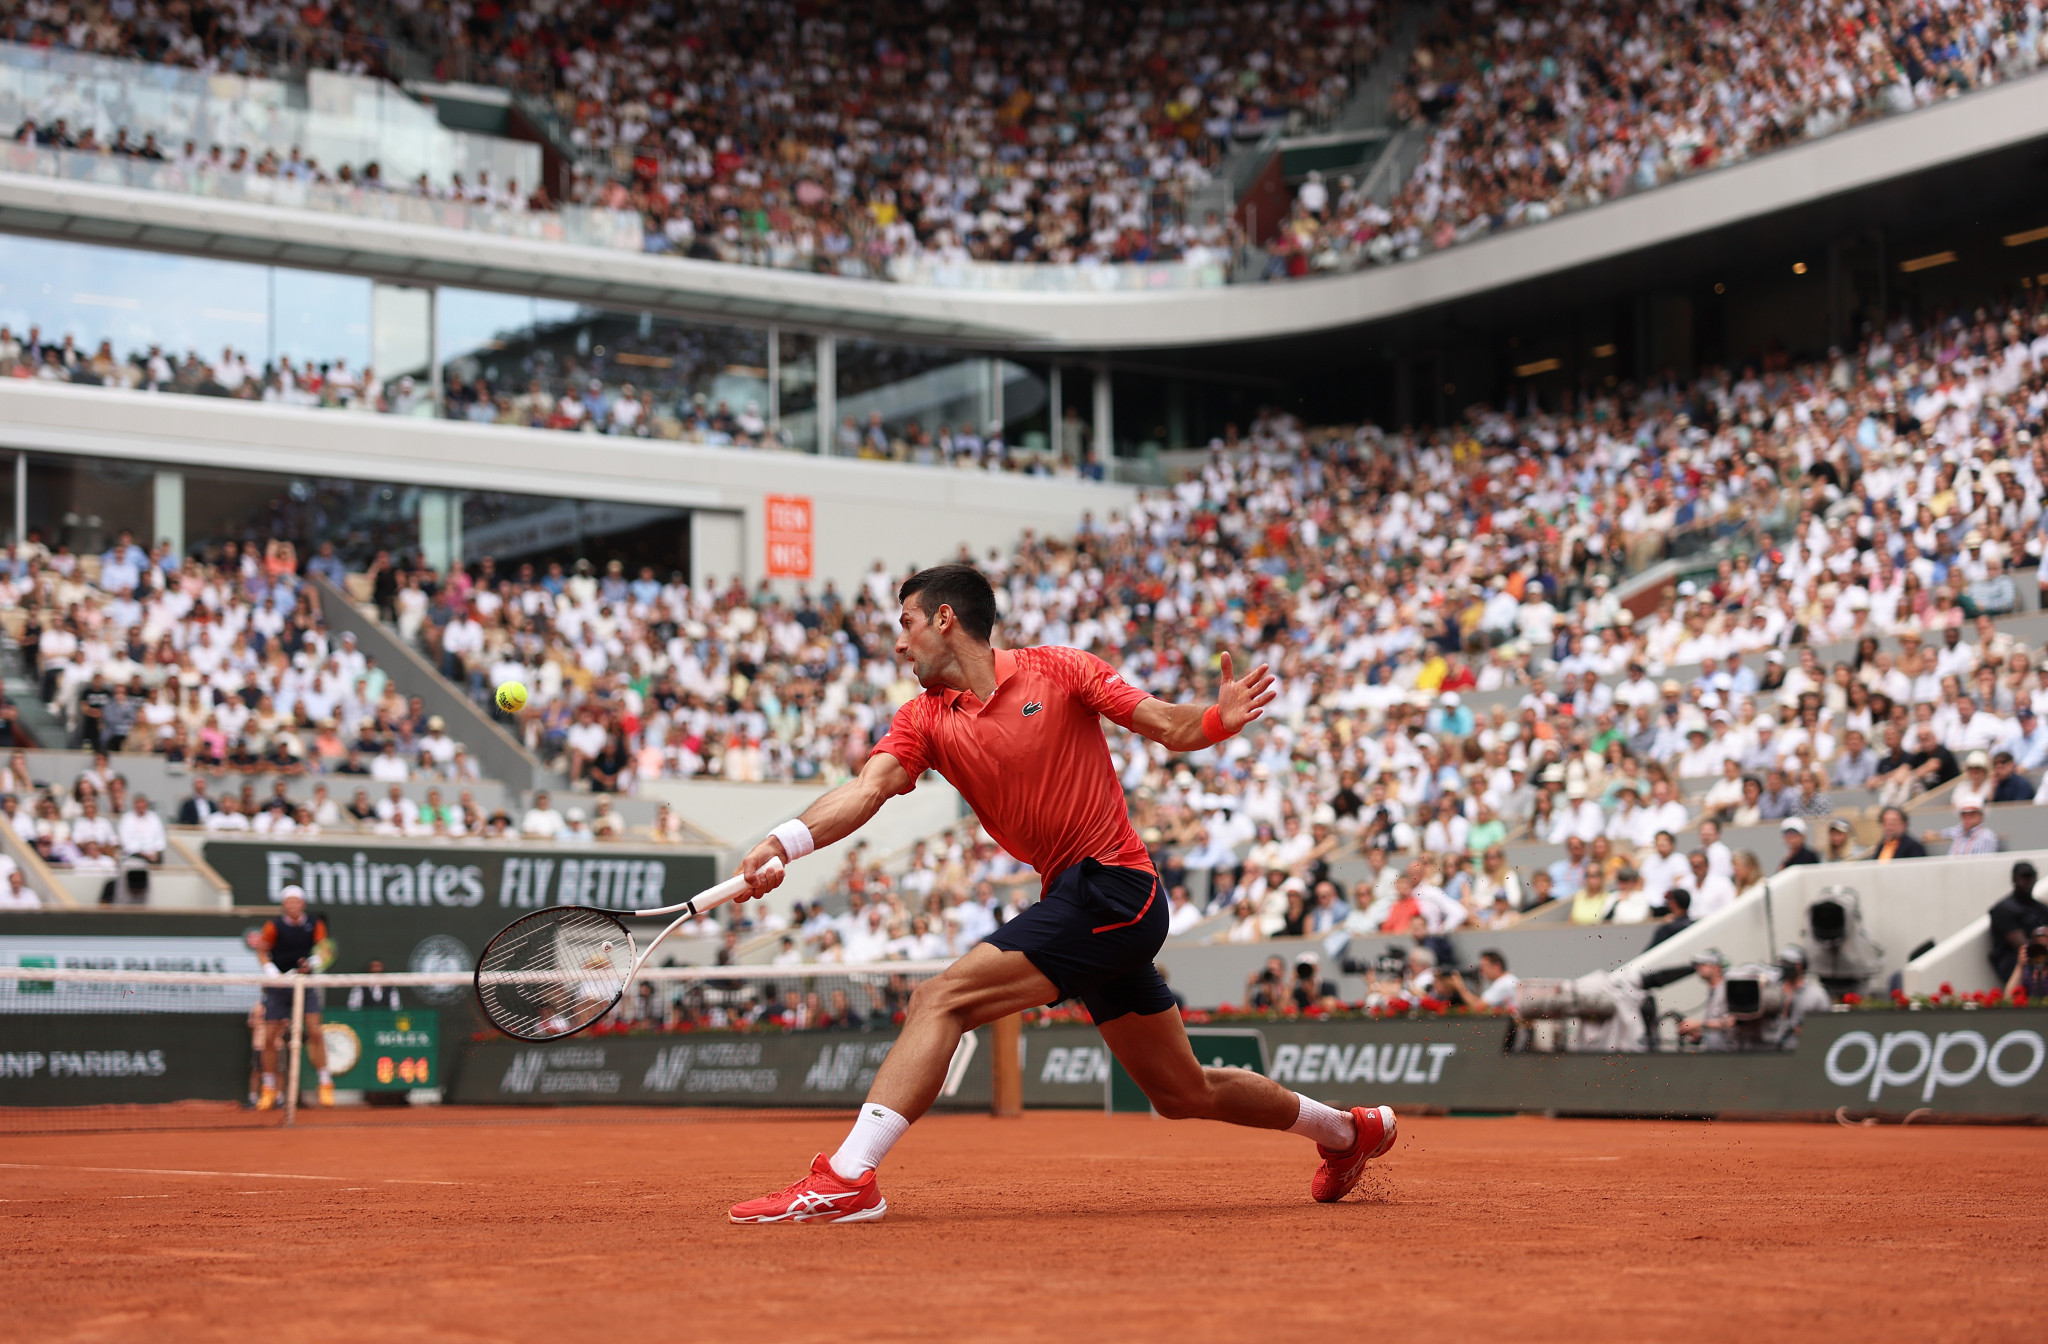 Roland Garros, a venue where Novak Djokovic has secured three French Open titles, is set to stage tennis competition during Paris 2024 ©Getty Images